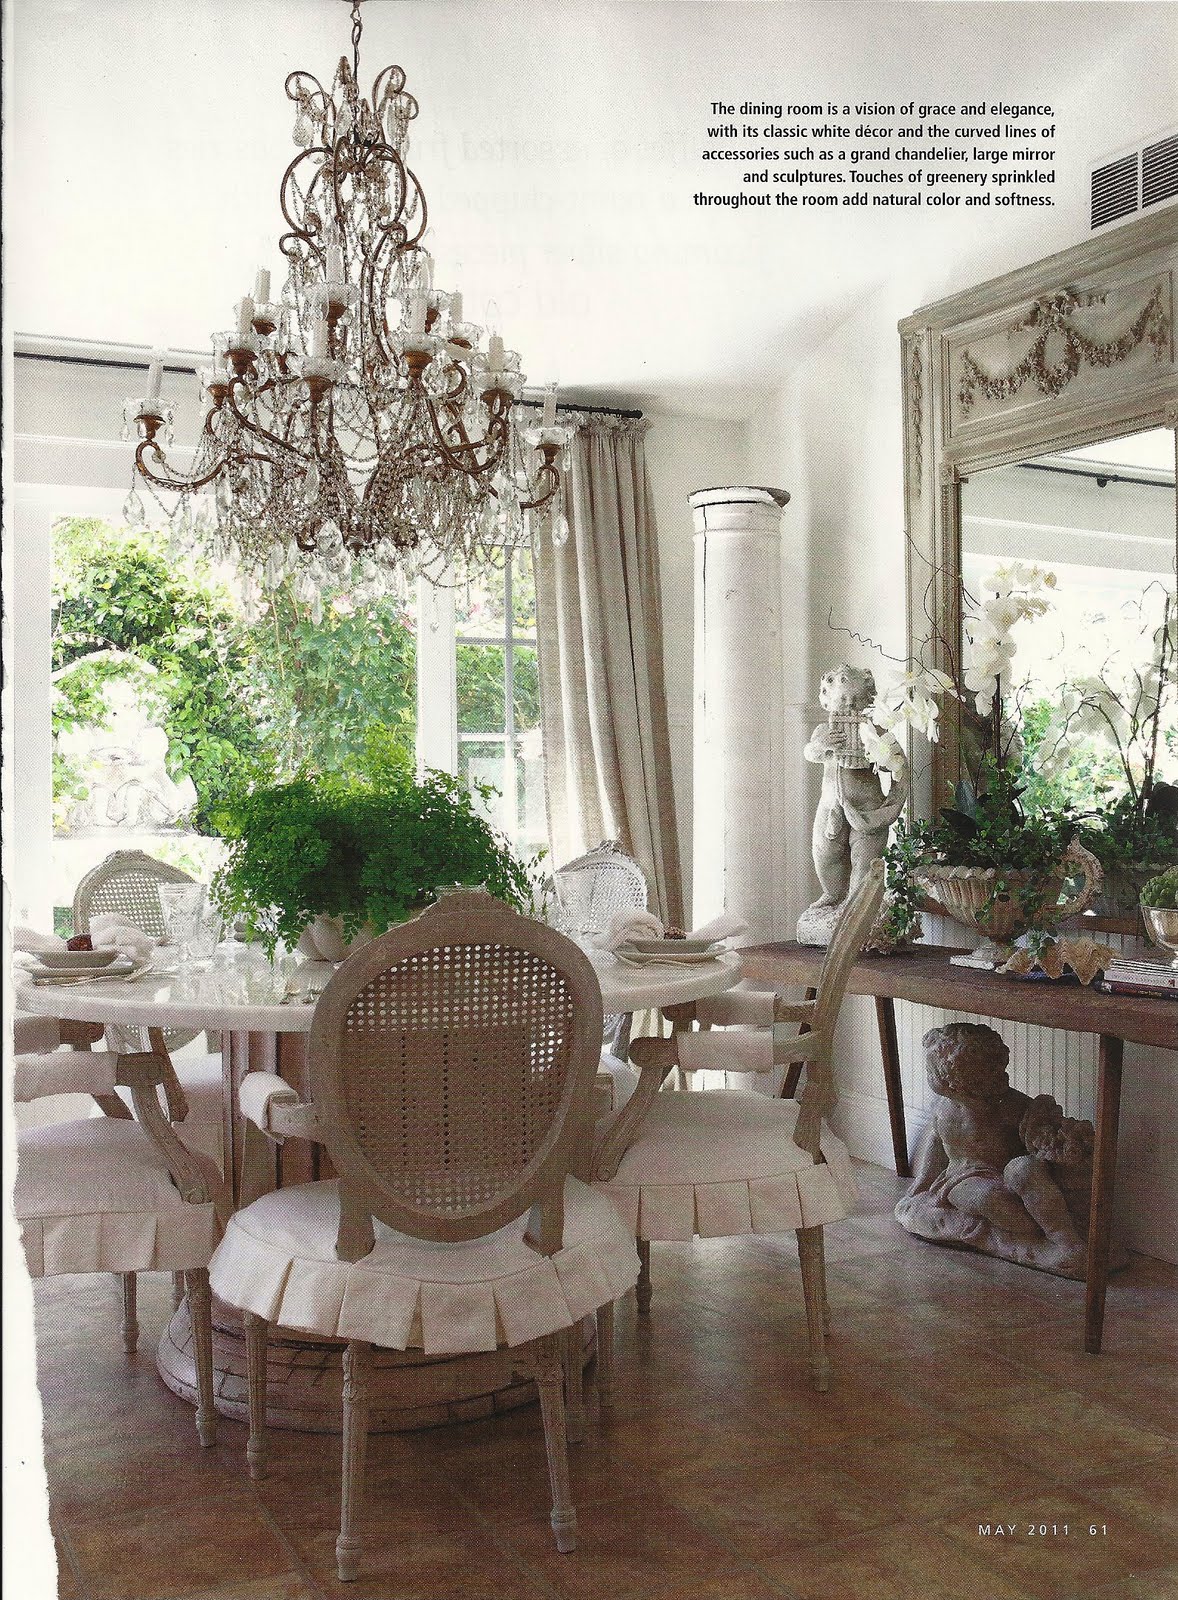 Full Bloom Cottage: Romantic Homes May 2011 Issue....